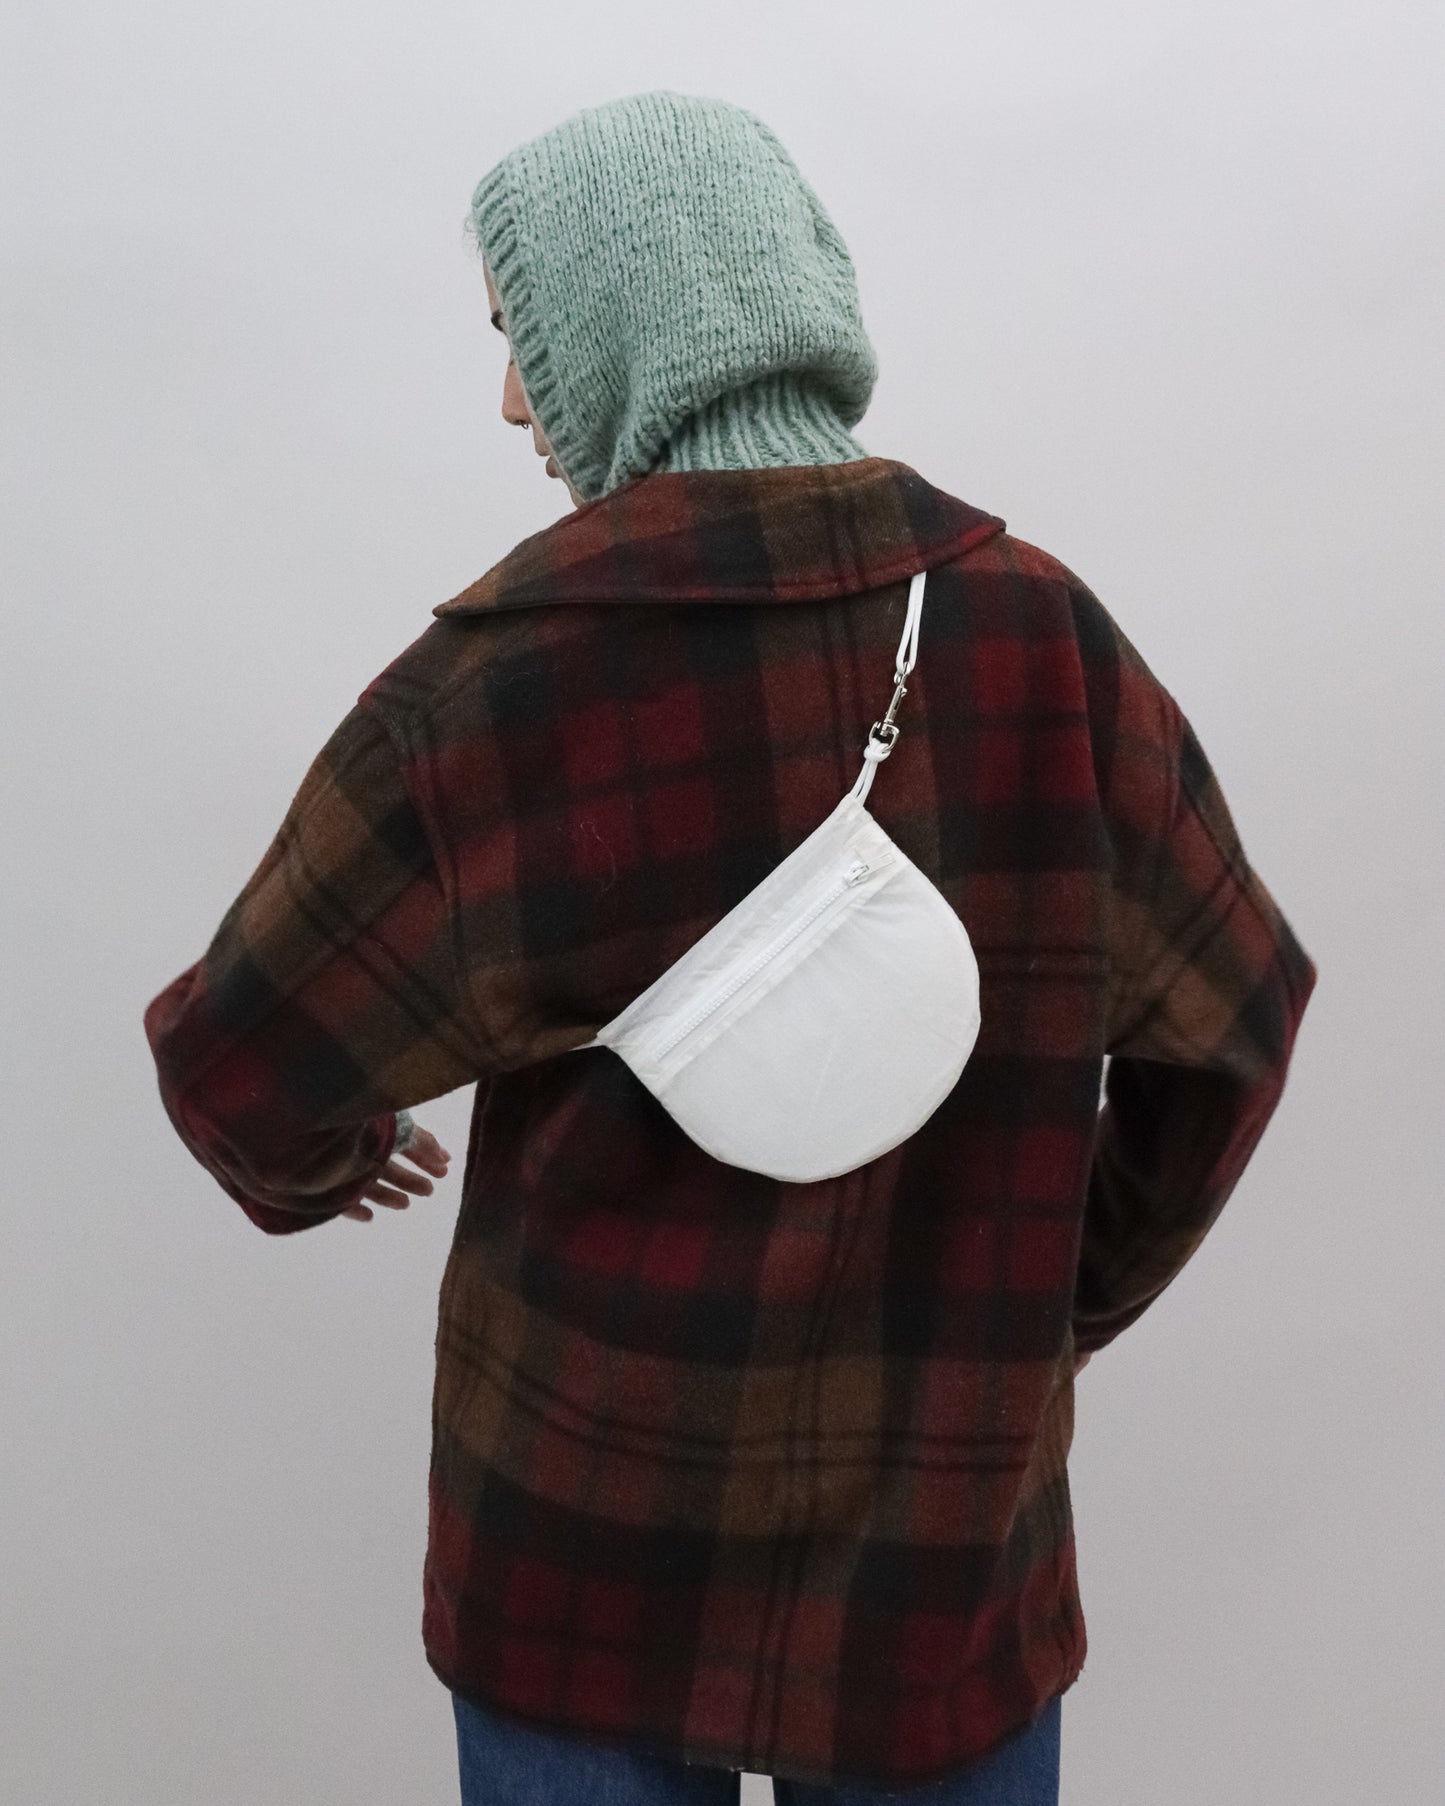 Model wears Cross body bag in white / clear from upcycled nylon cut from vintage paragliders